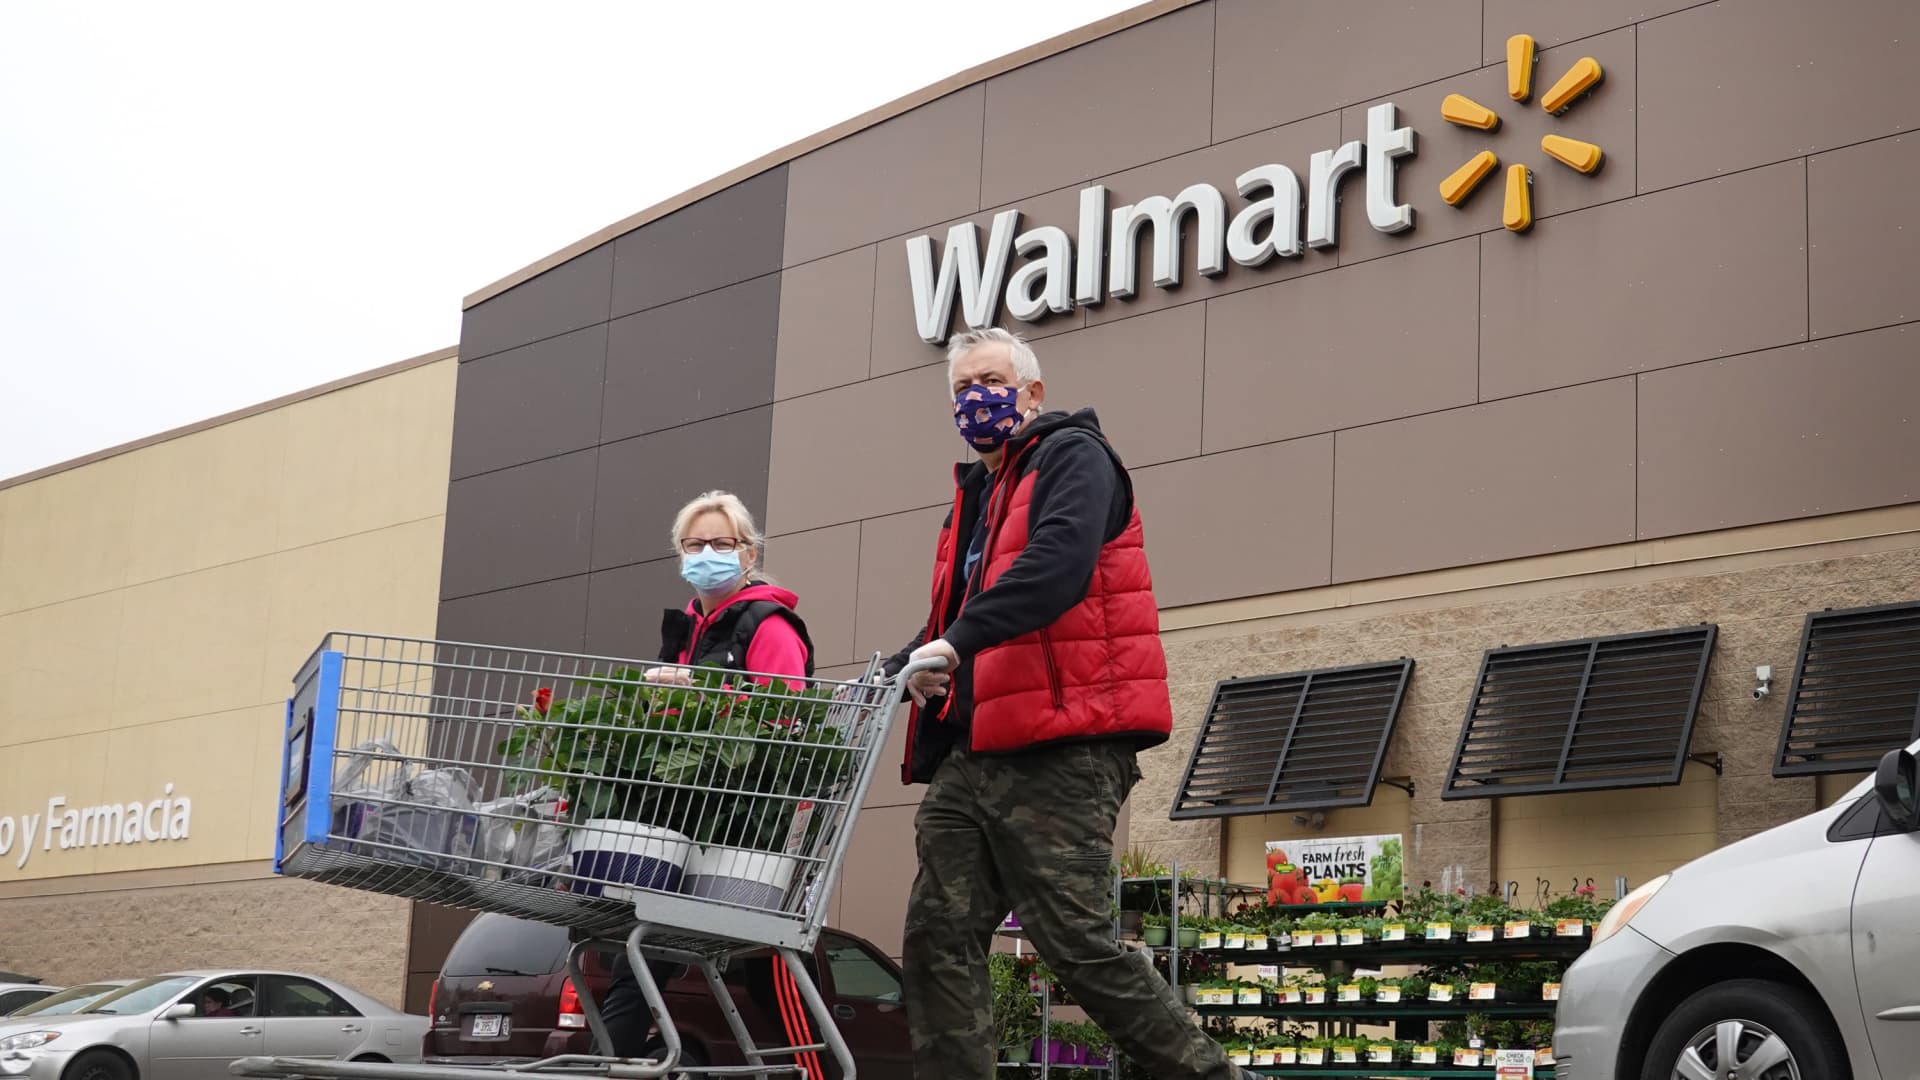 Customers shop at a Walmart store on May 19, 2020 in Chicago, Illinois.